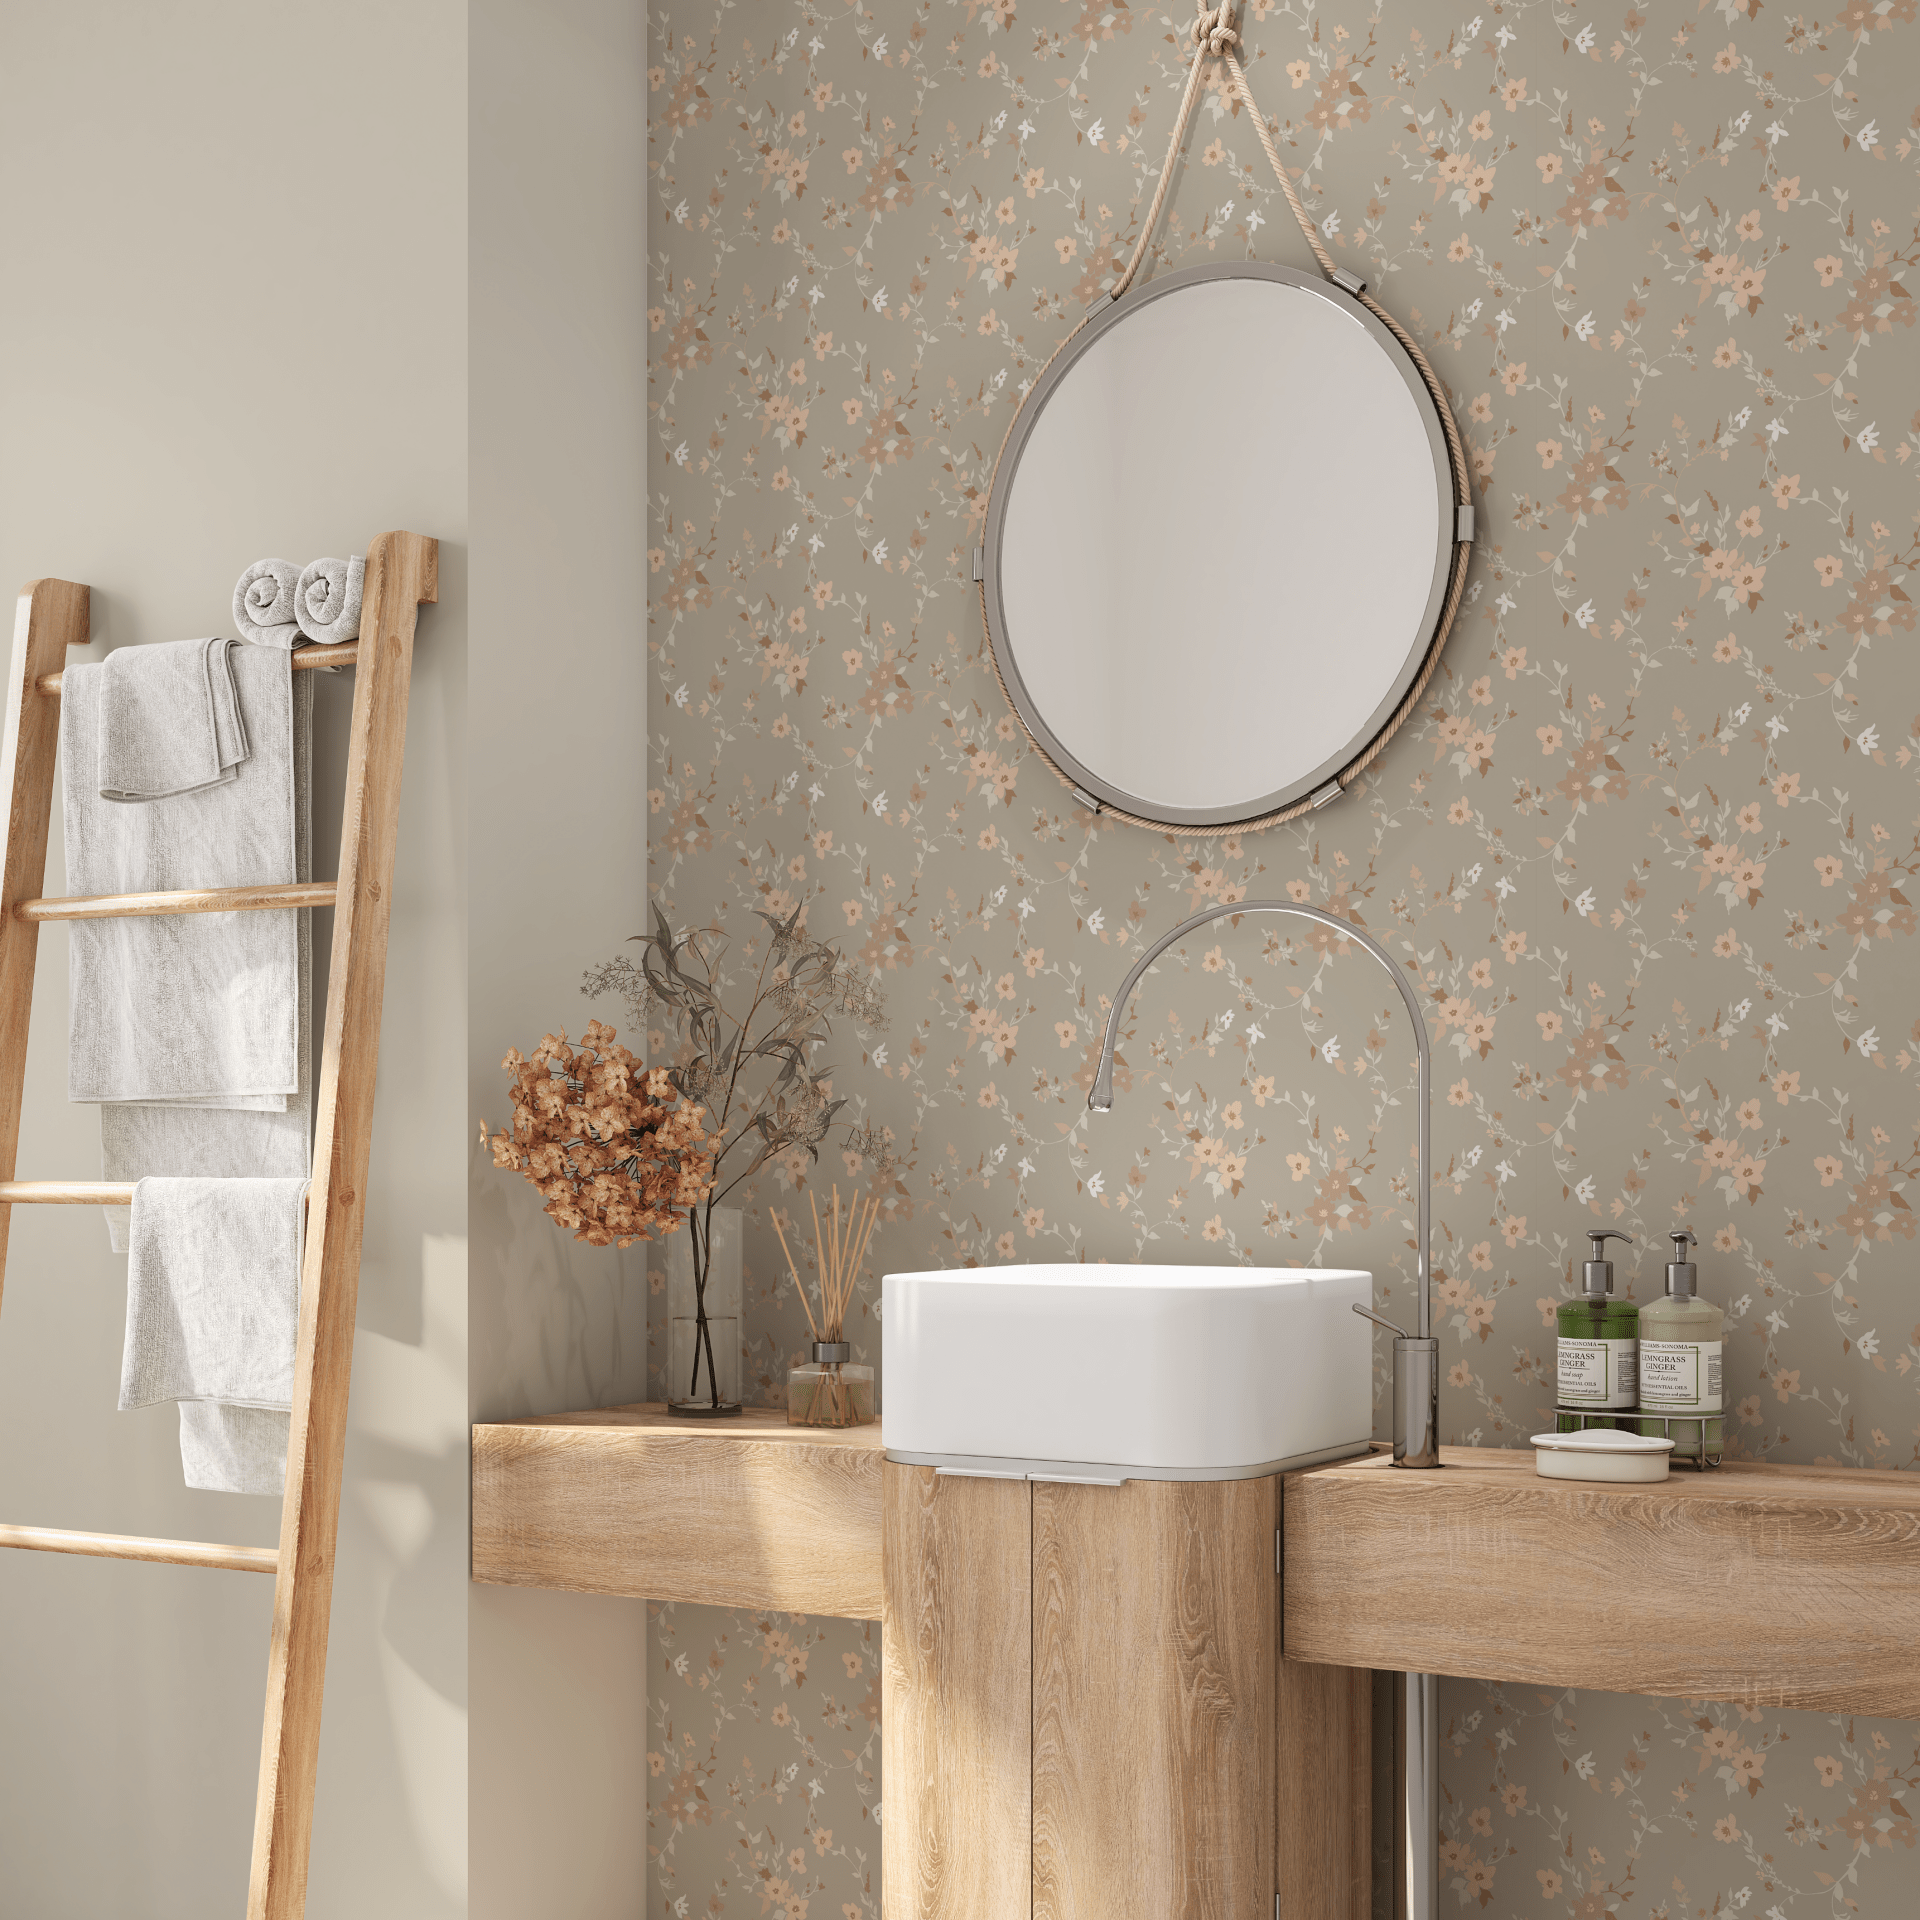 Rustic floral wallpaper in a bathroom setting, combining earthy elegance with functional design elements.